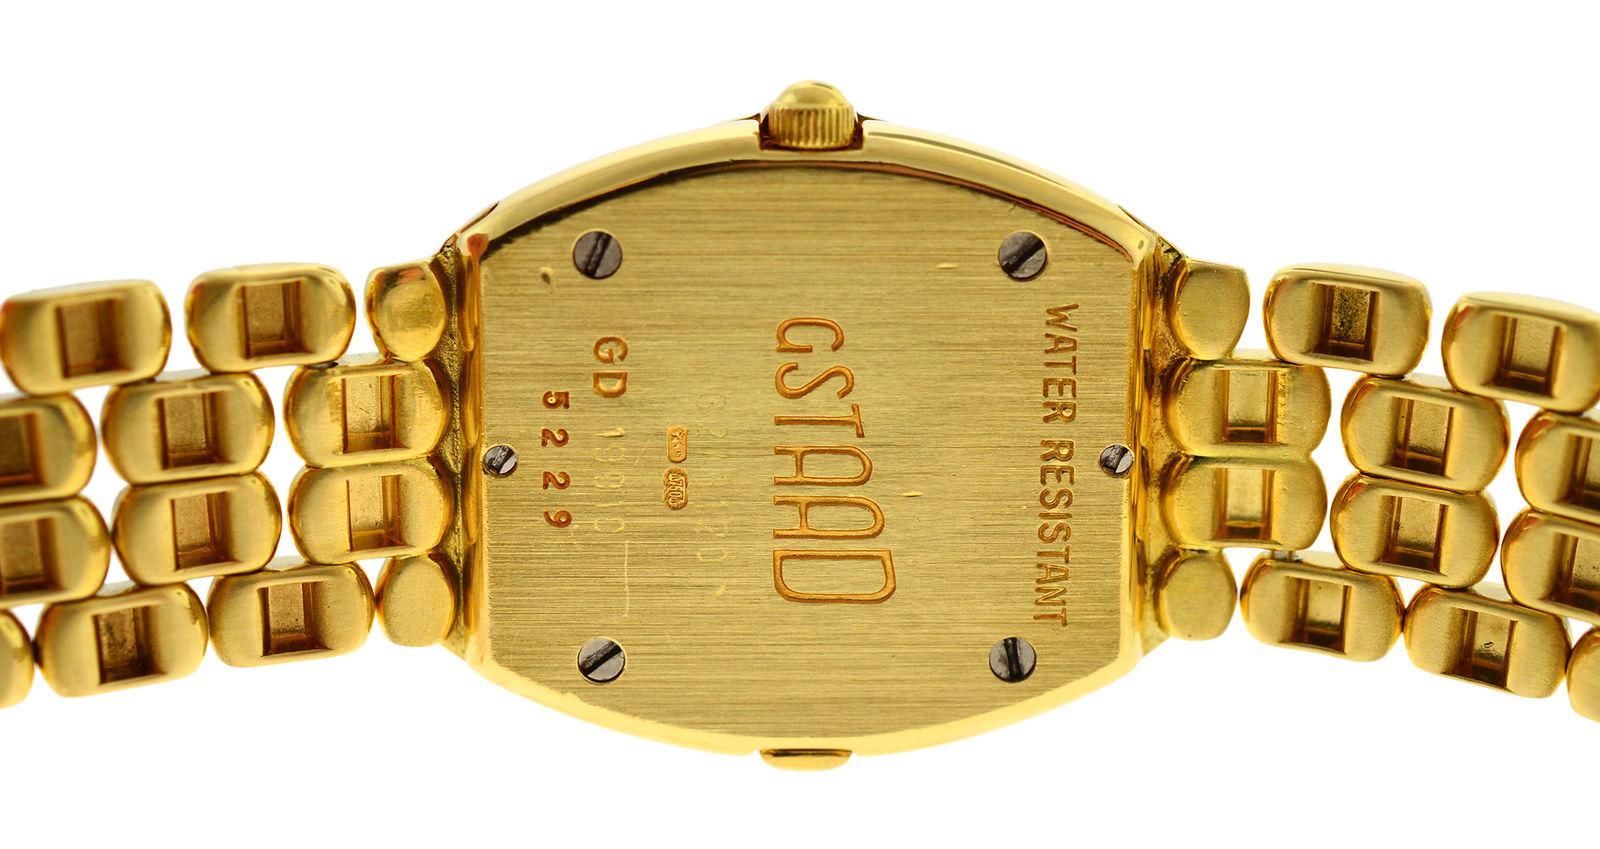 Authentic Ladies Chopard Gstaad Quartz 18 Karat Yellow Gold Watch In Excellent Condition For Sale In New York, NY